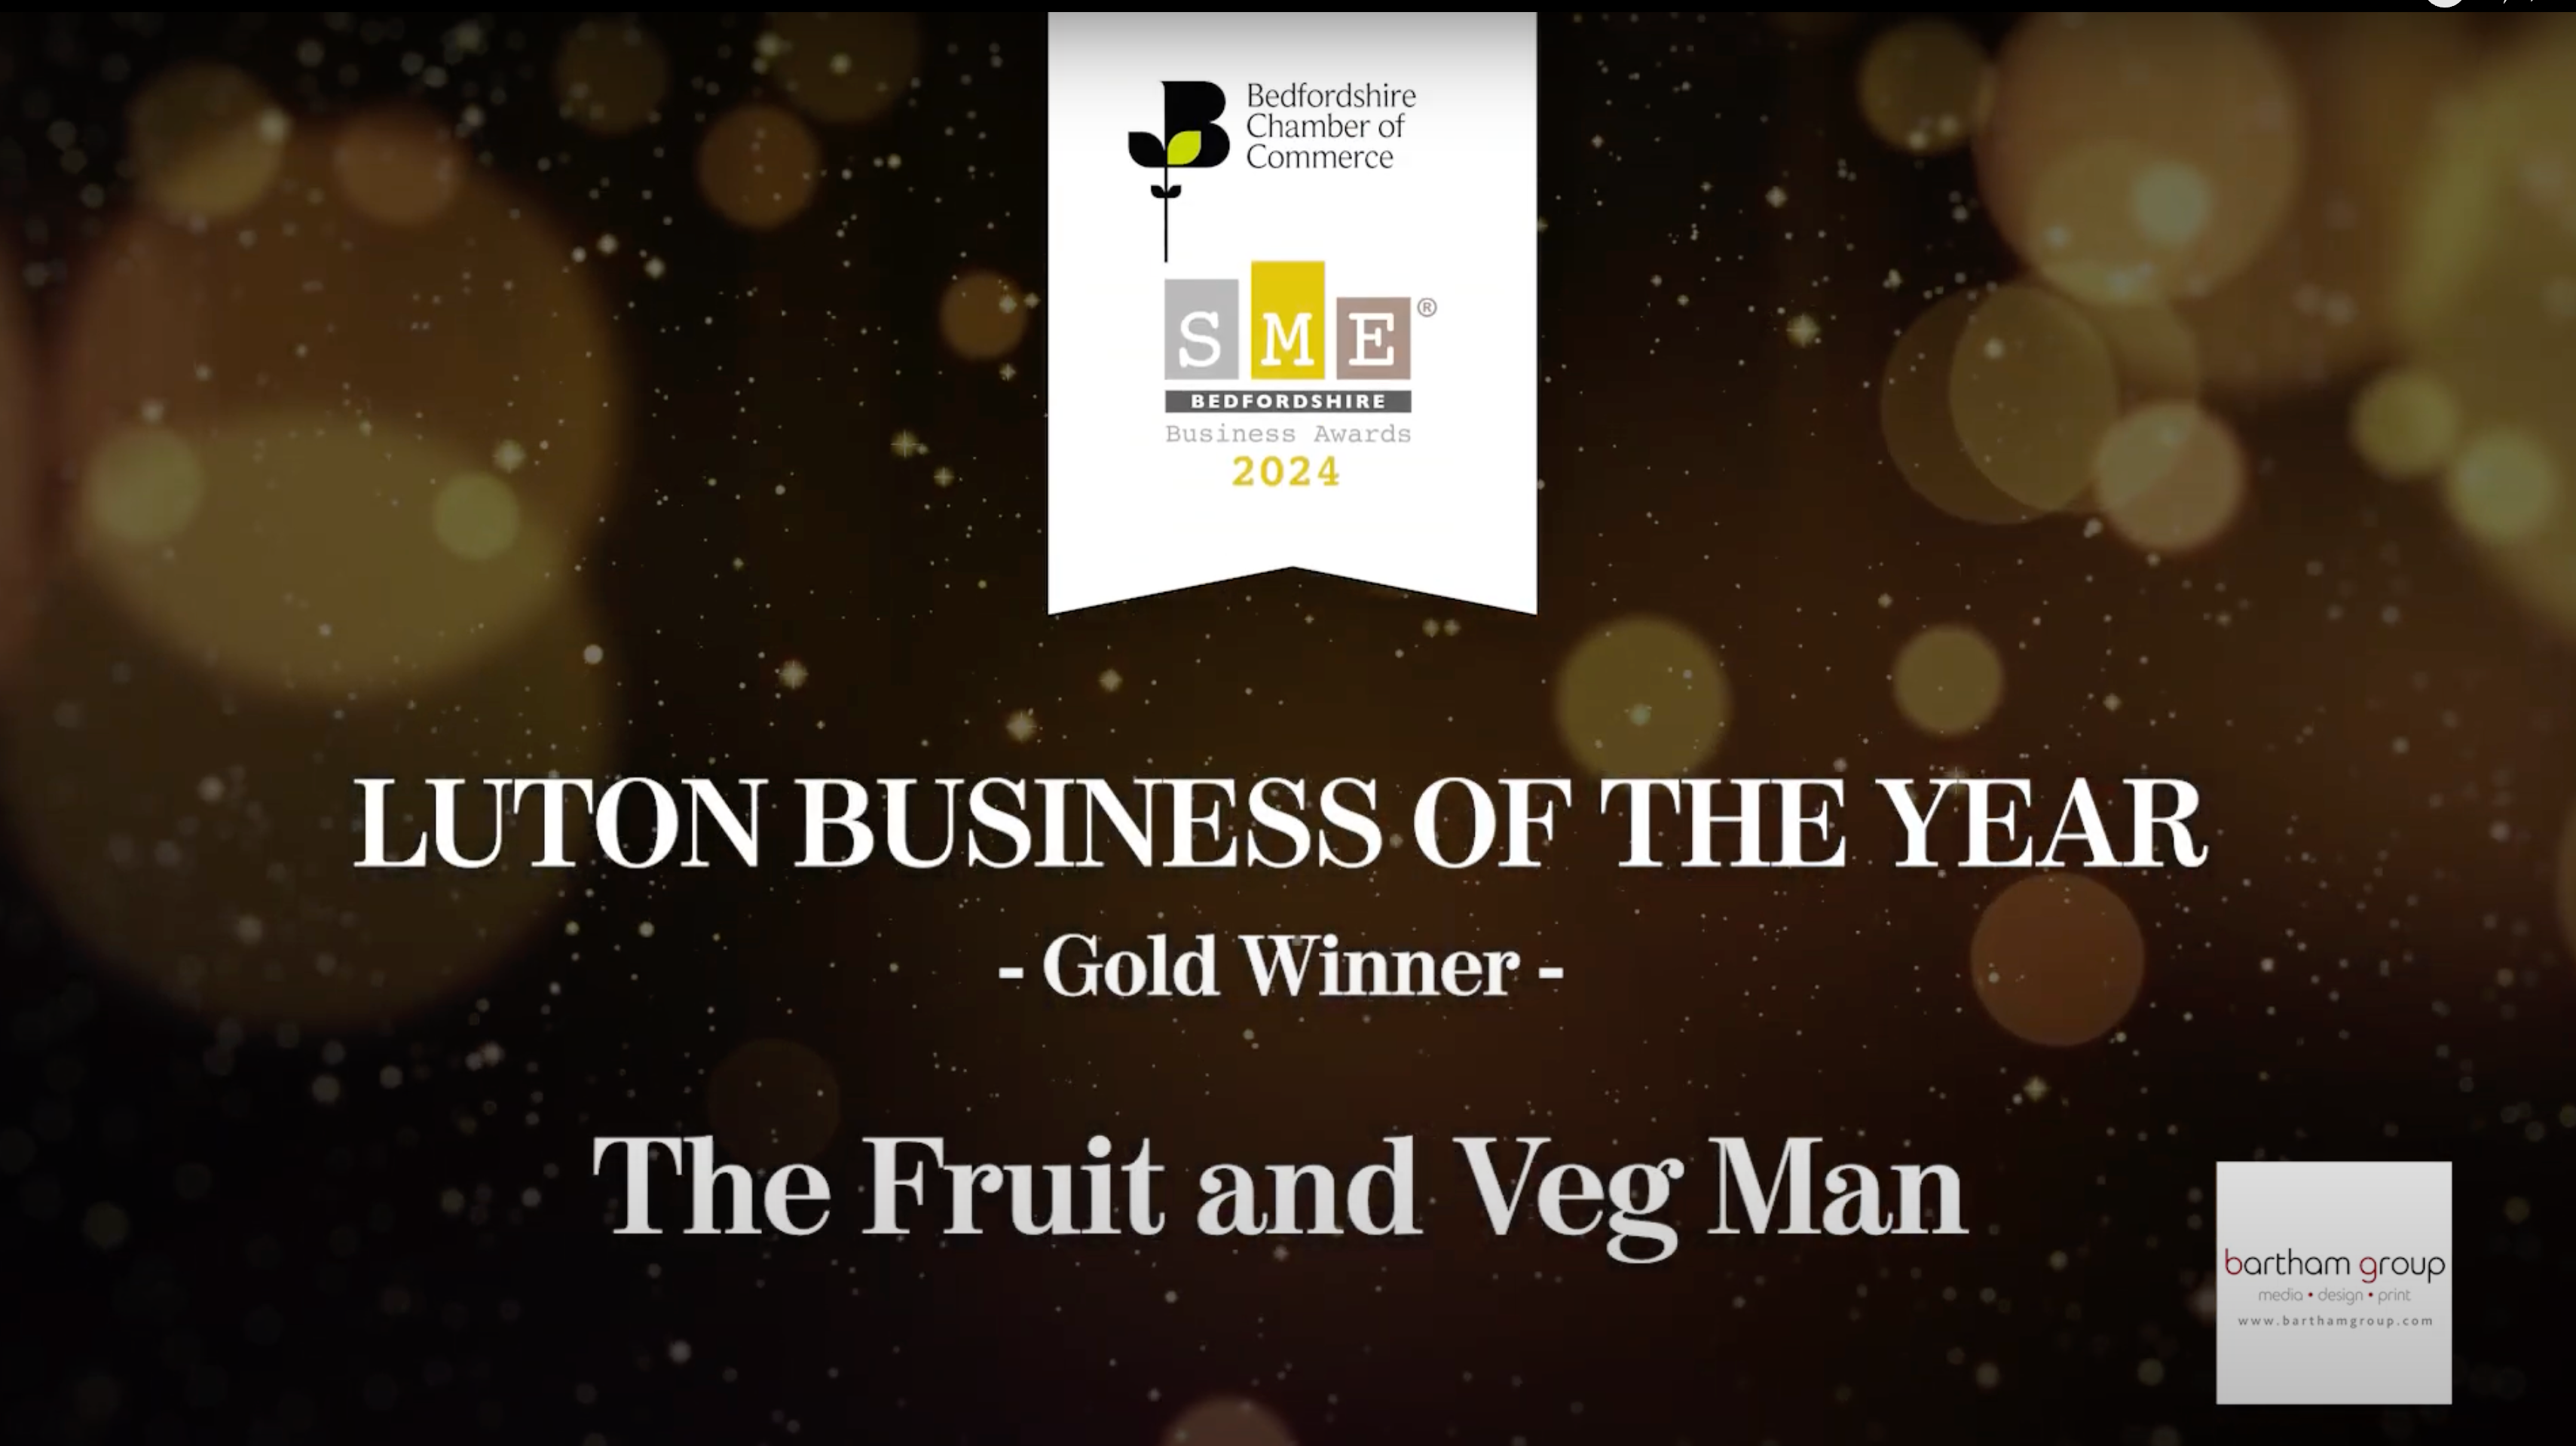 The Fruit and Veg Man (Luton) wins Luton Business of the Year 2024!